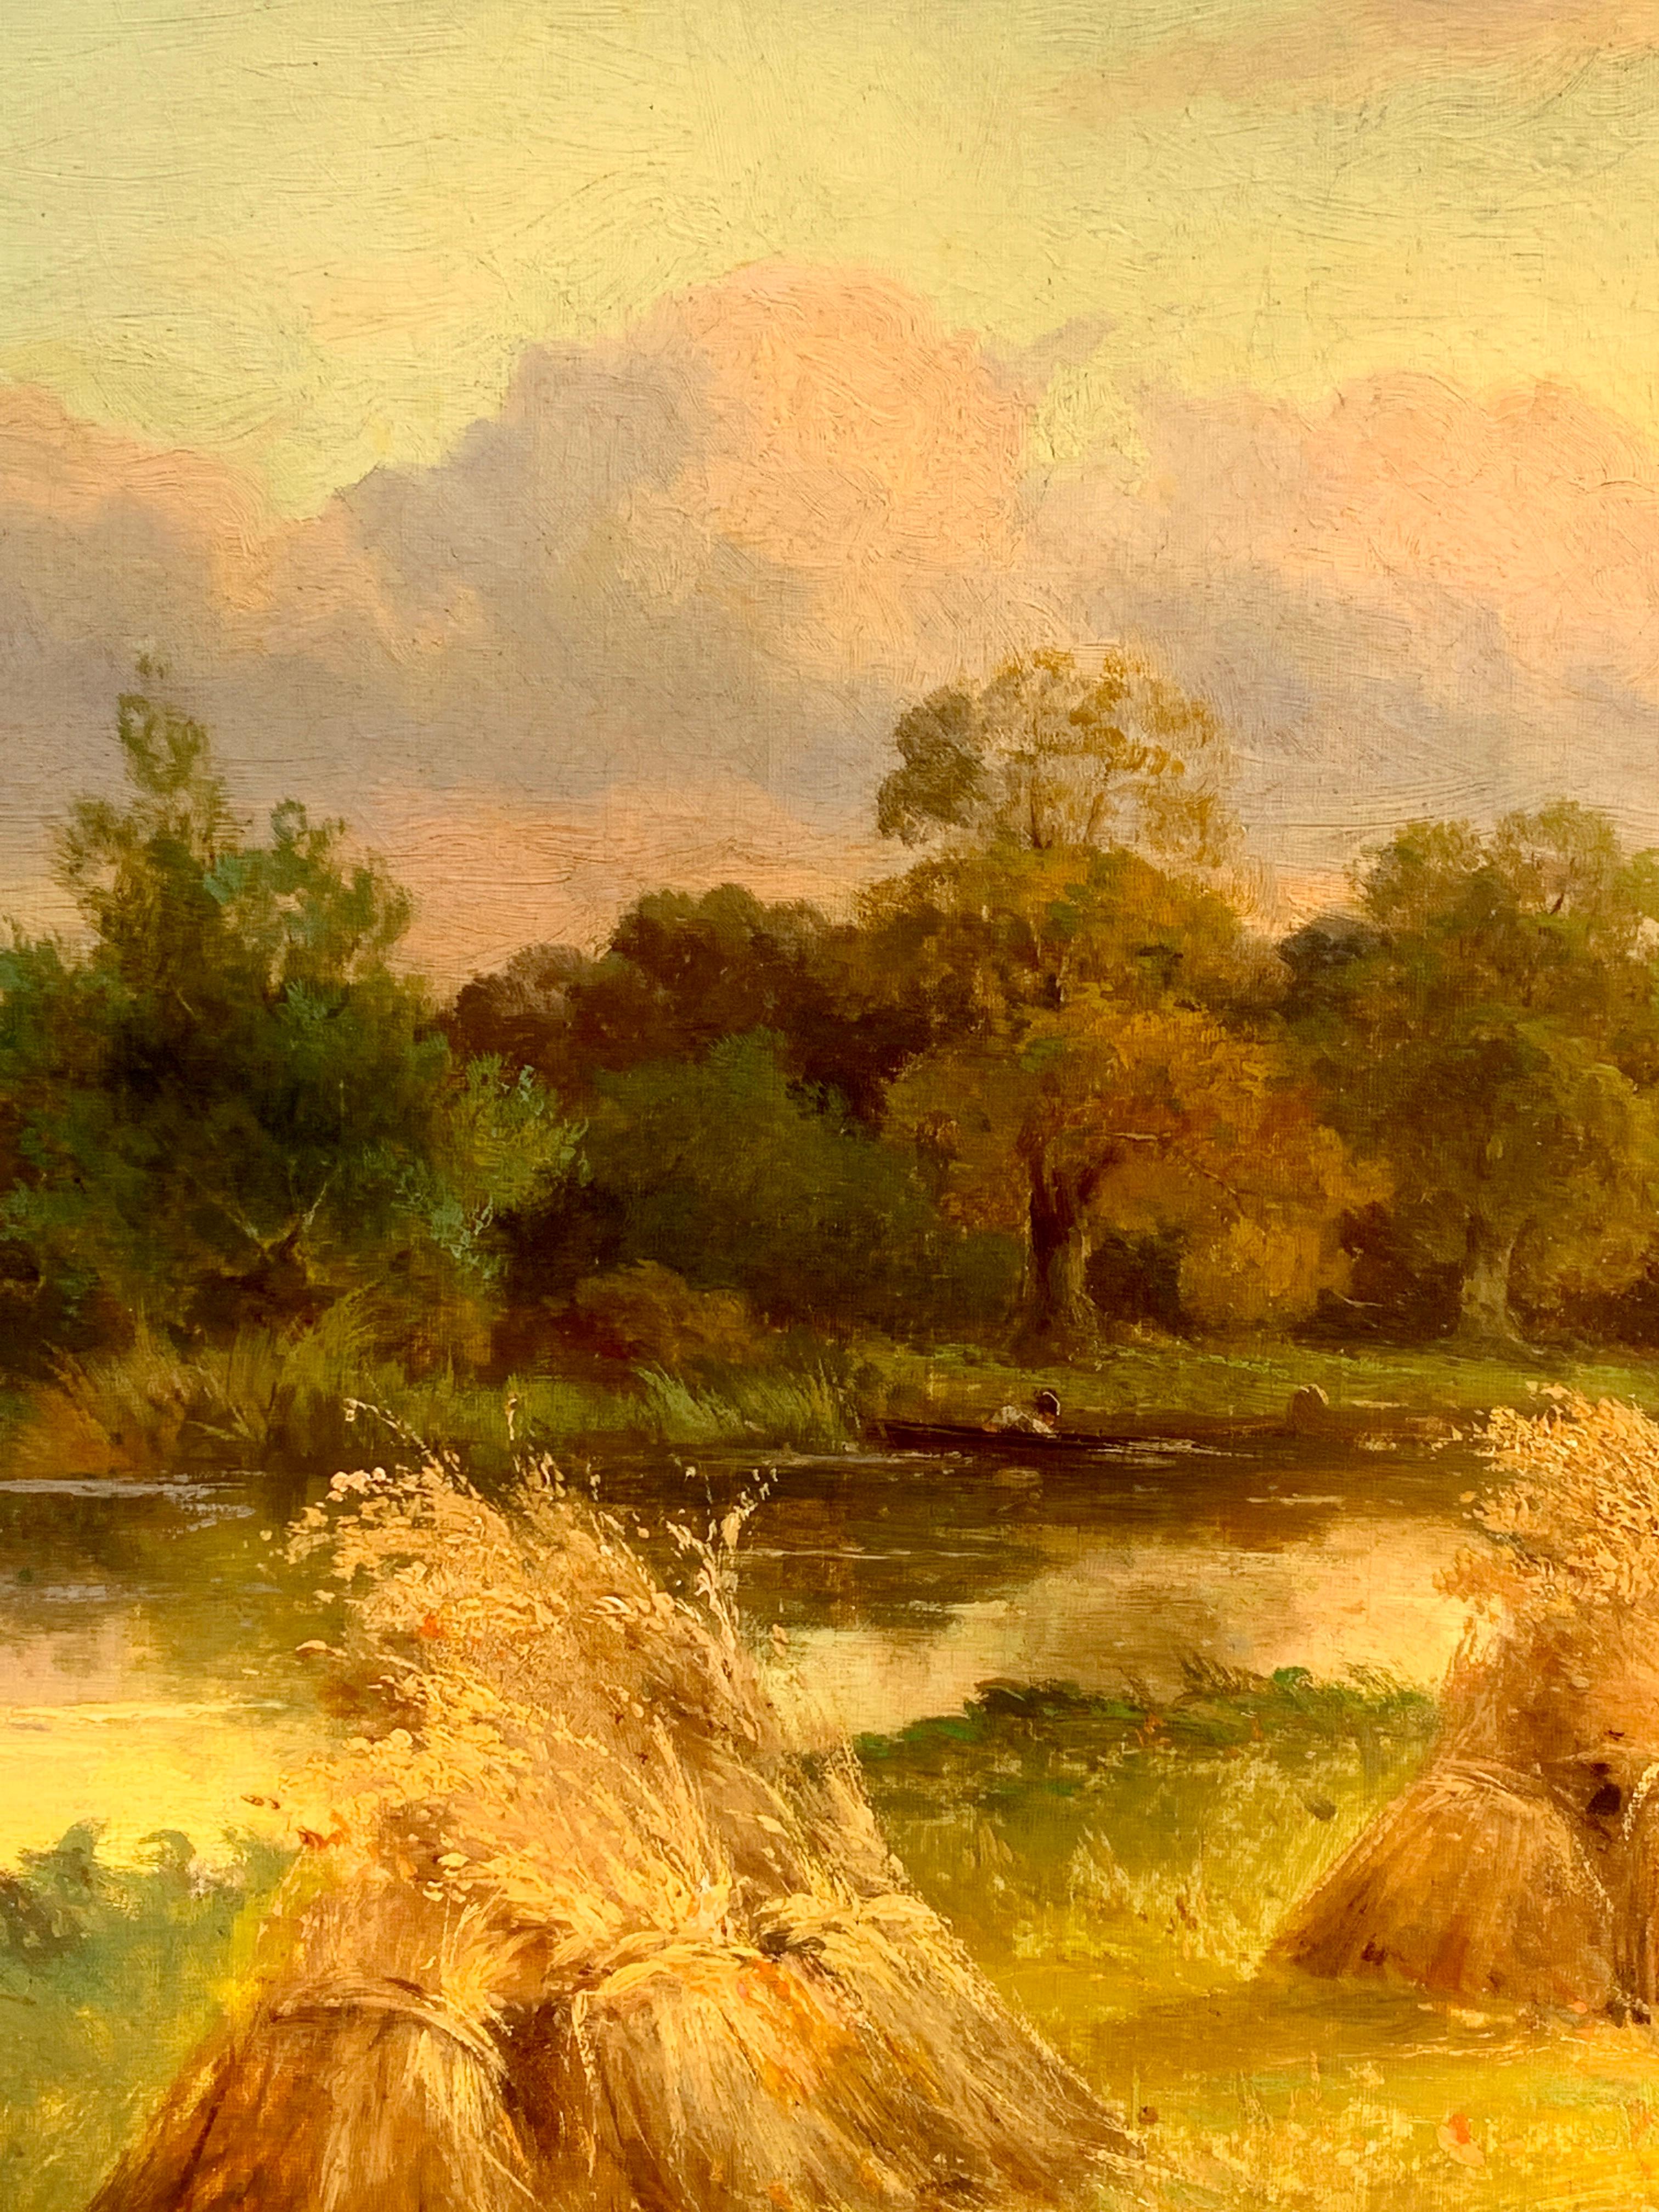 Outstanding Late Victorian English river harvest landscape. 

John Horace Hooper lived in London. Landscape painter. English School. A prolific artist evidenced by the frequent appearance of his work in the salerooms. He painted in a broad realistic